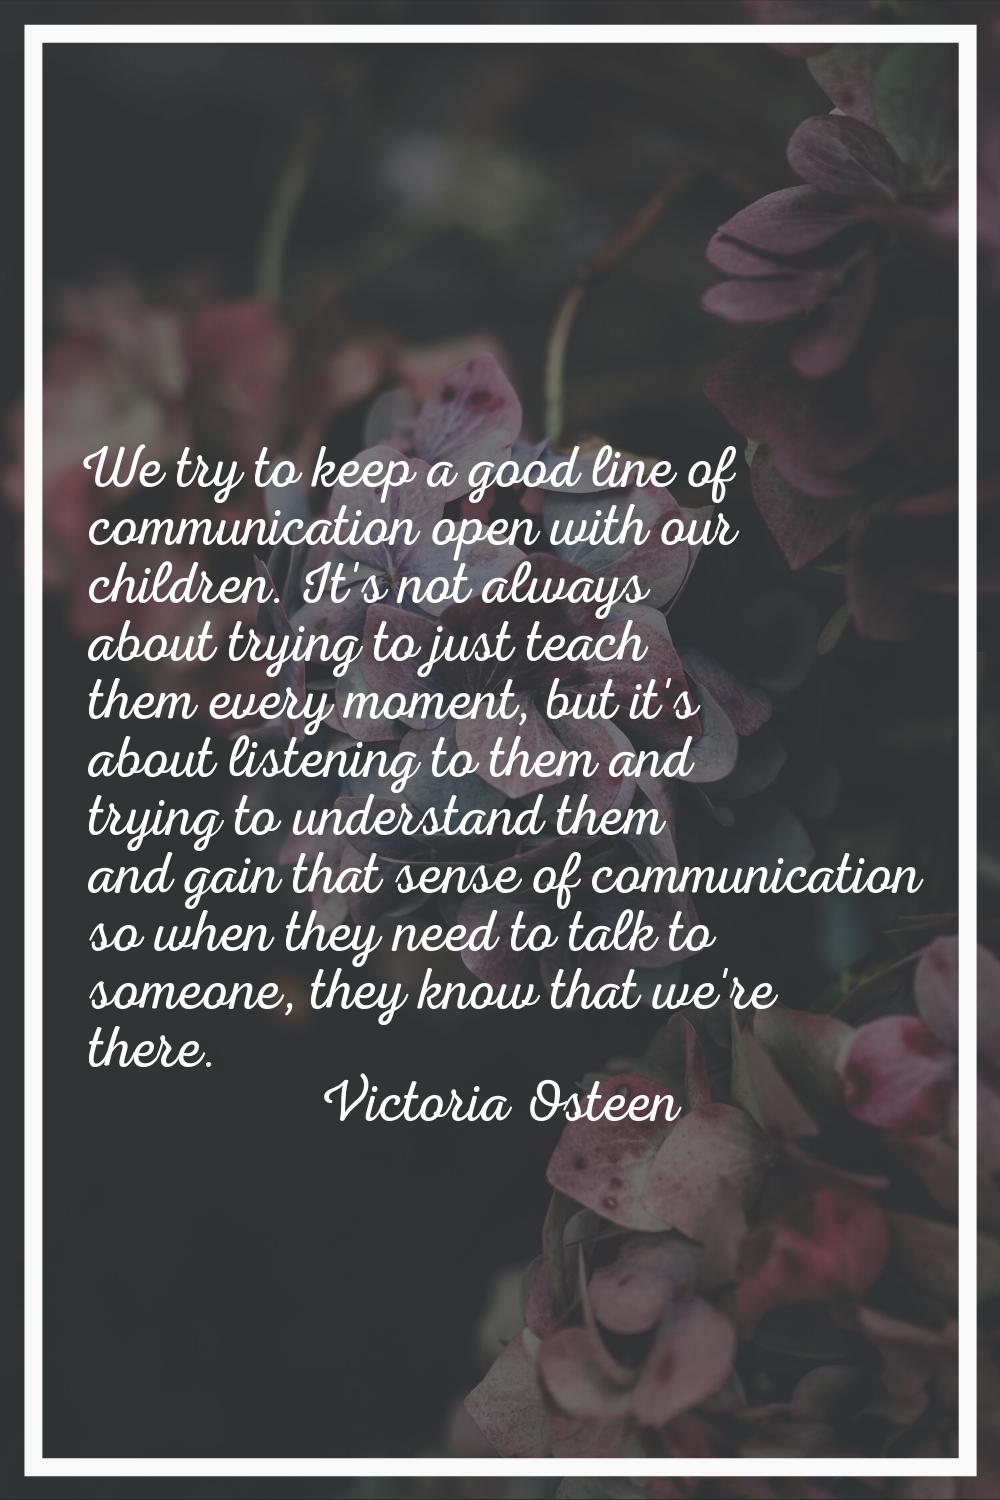 We try to keep a good line of communication open with our children. It's not always about trying to